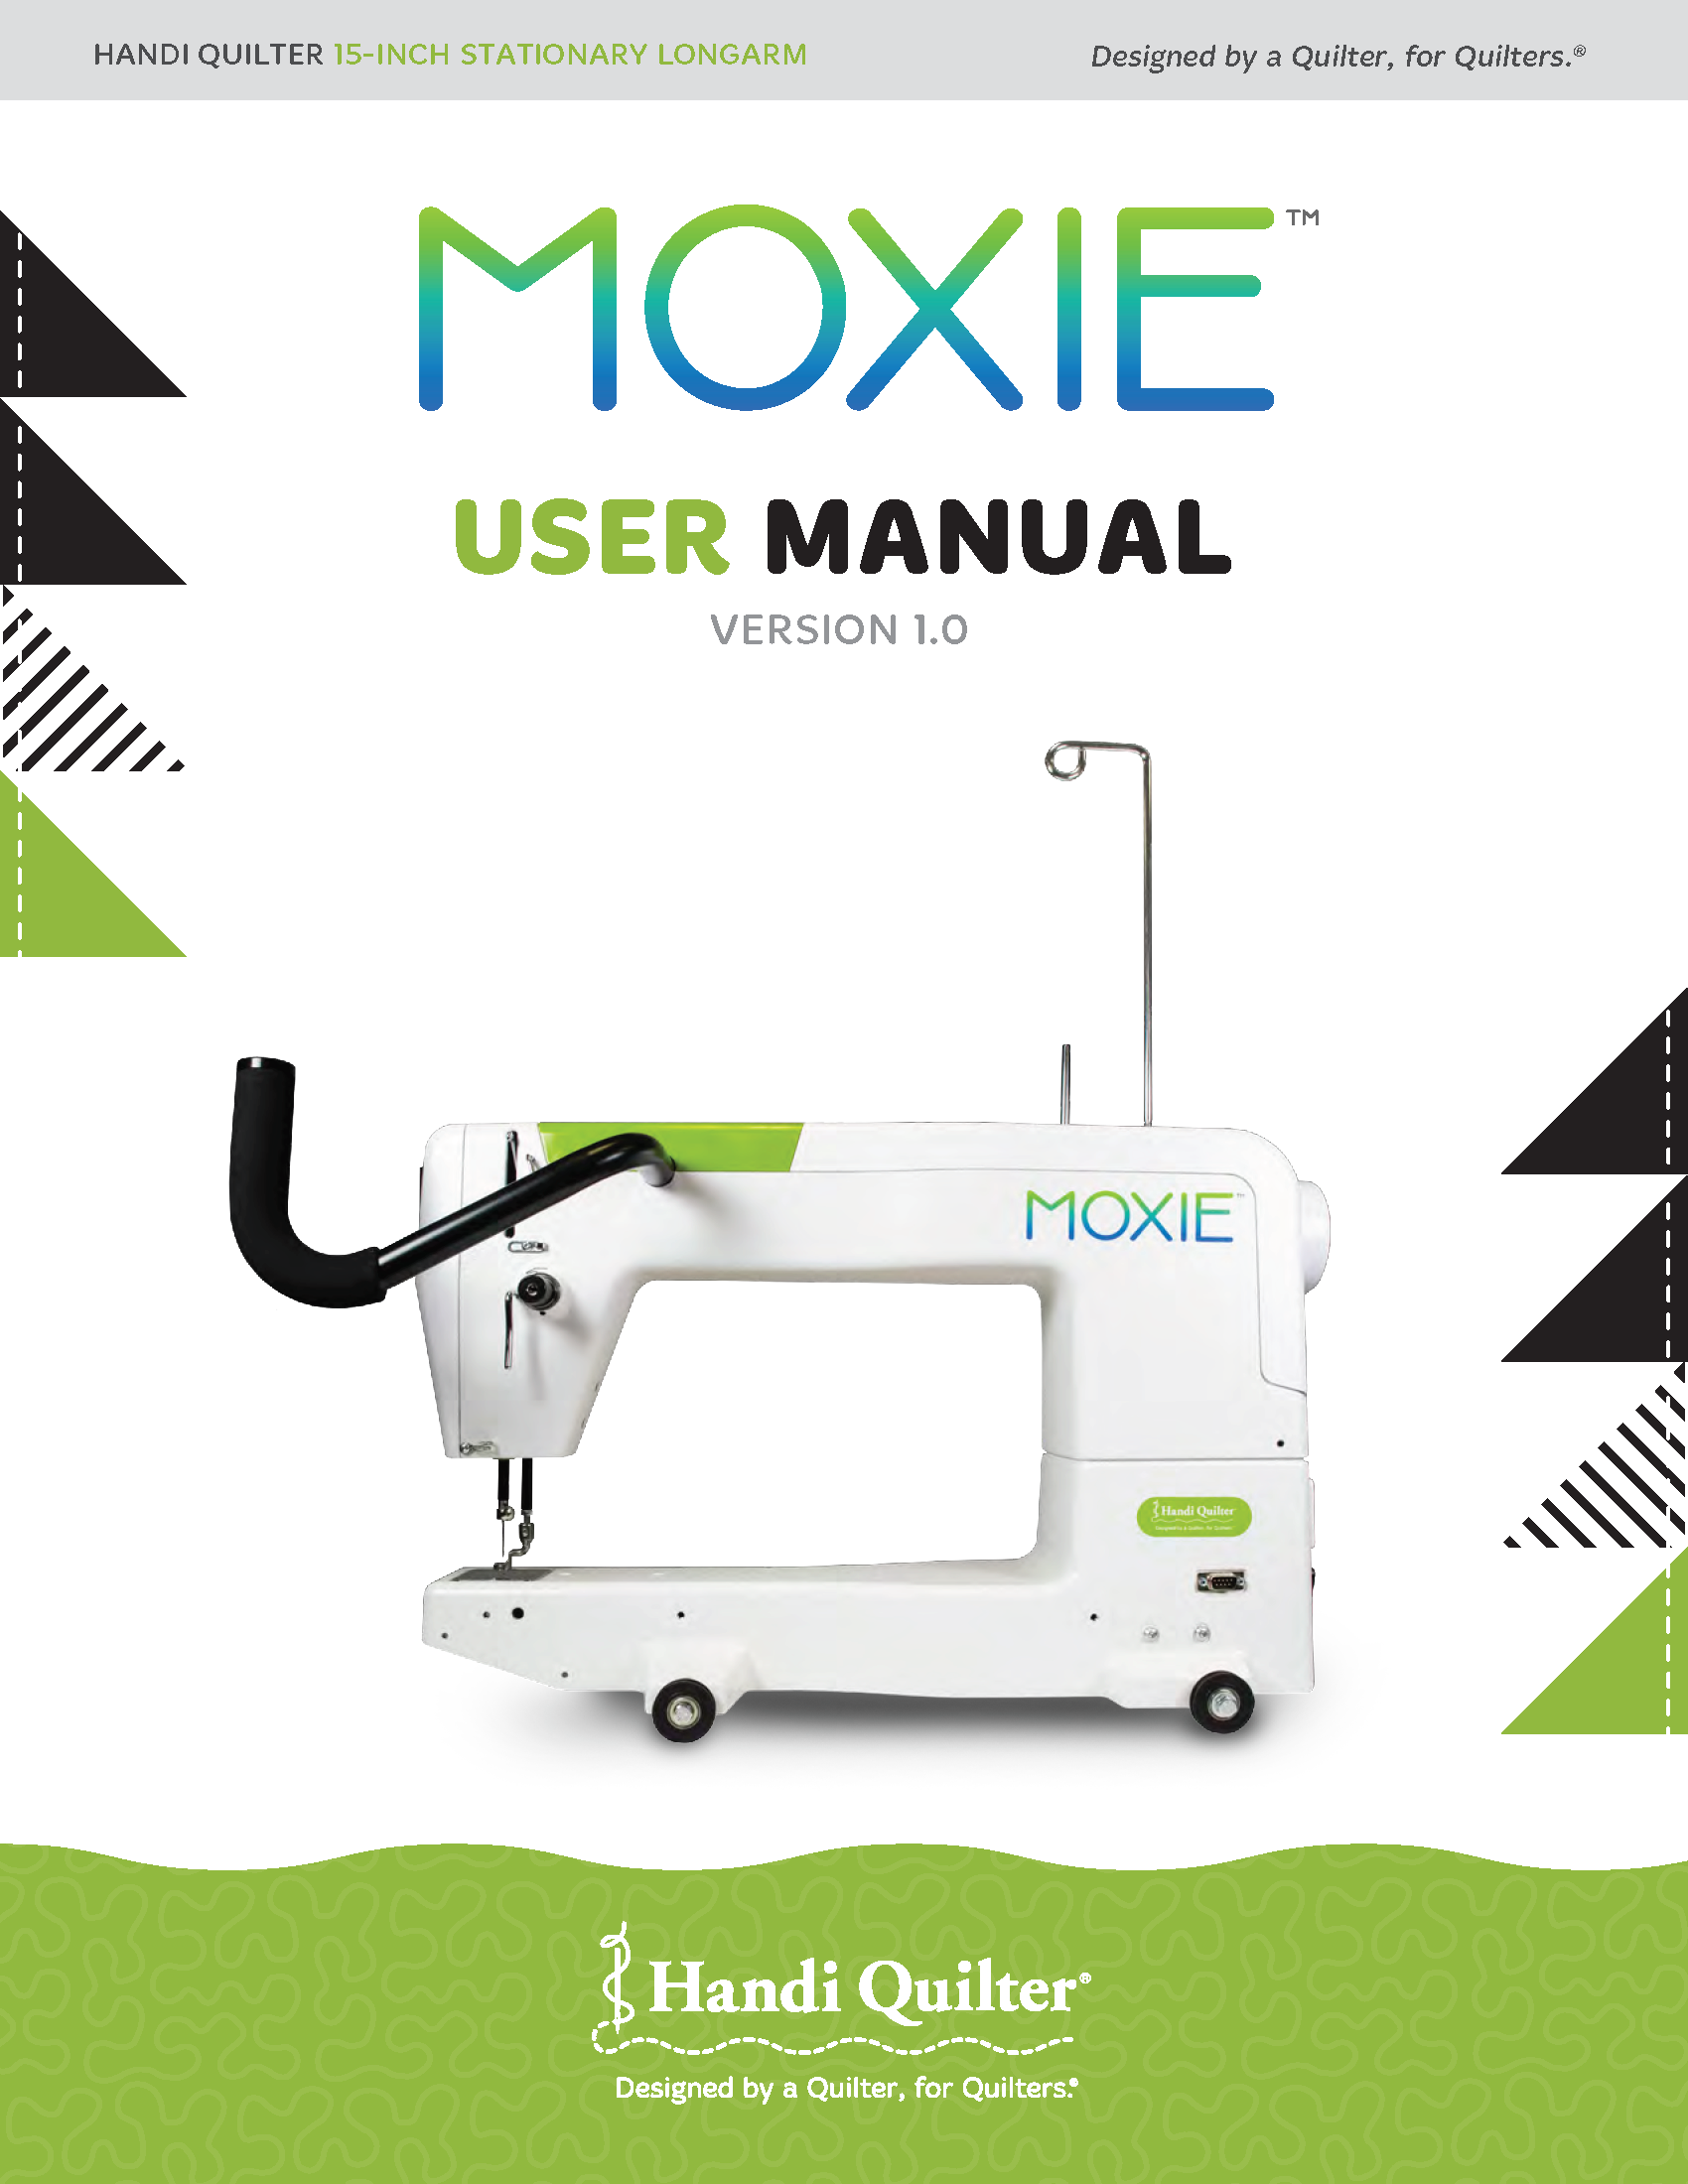 HQ-Moxie-User-Manual-March_2021_Page_01.png